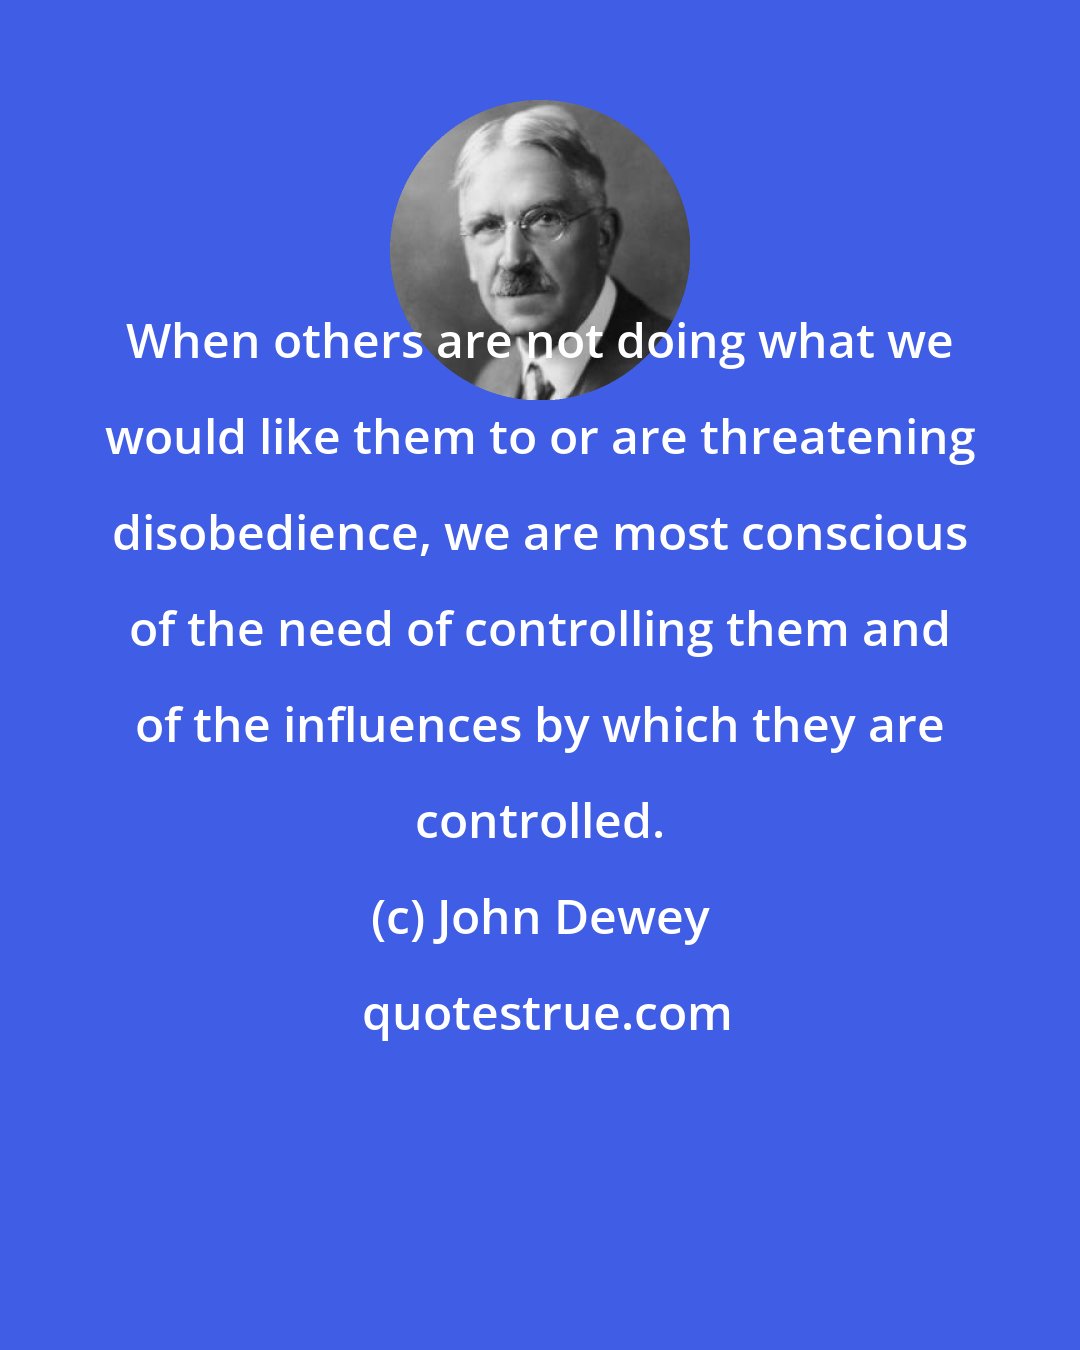 John Dewey: When others are not doing what we would like them to or are threatening disobedience, we are most conscious of the need of controlling them and of the influences by which they are controlled.